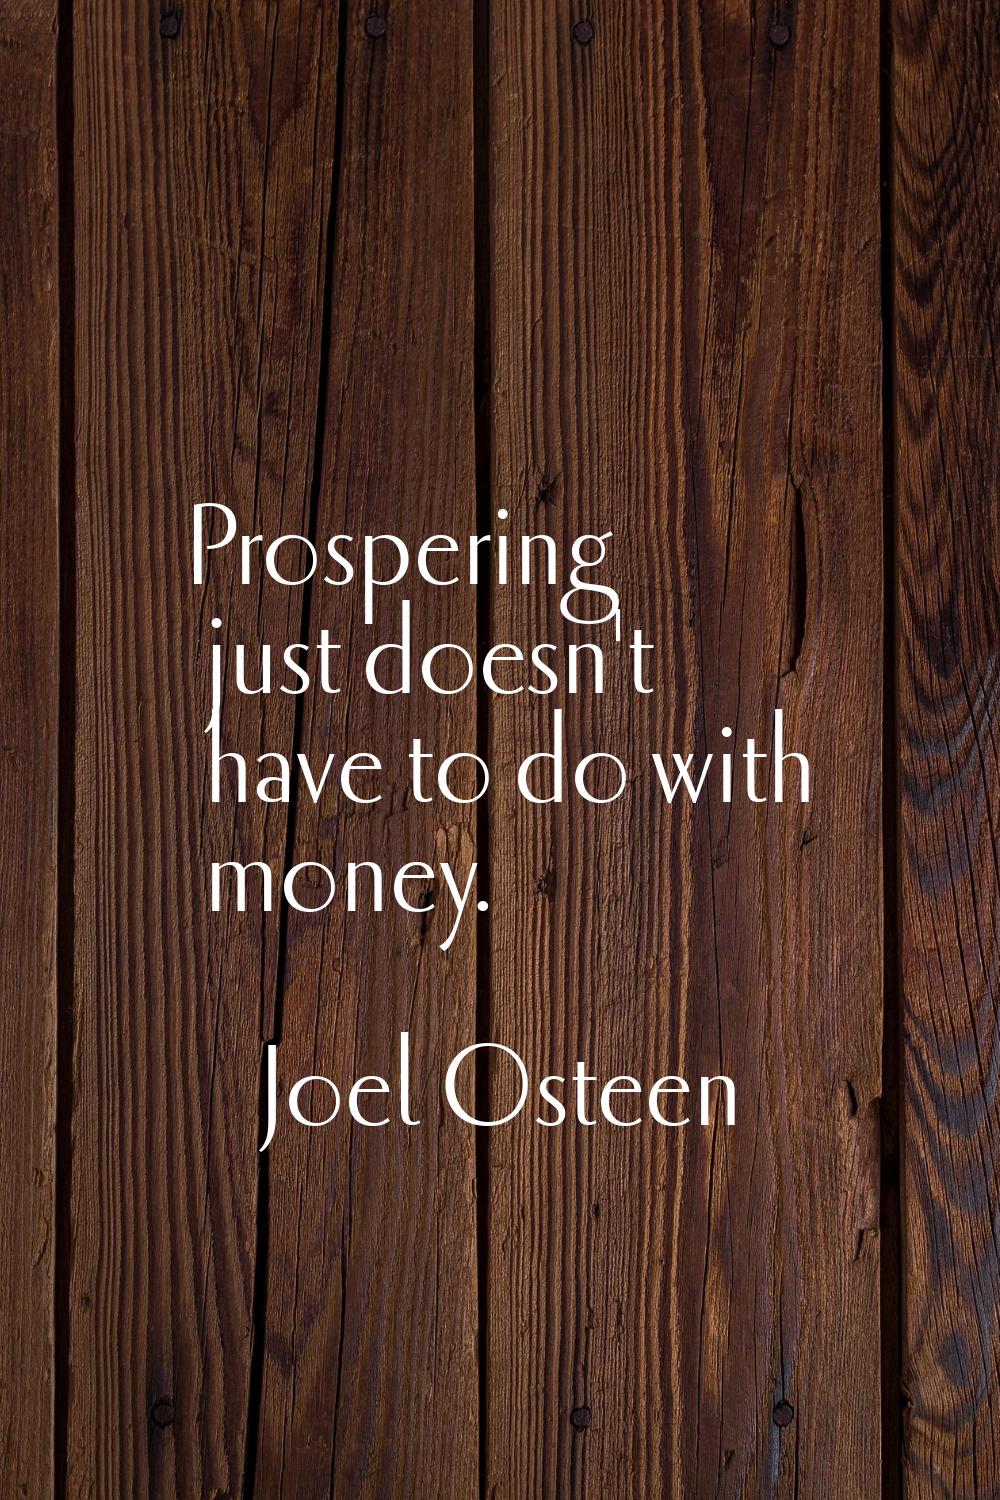 Prospering just doesn't have to do with money.